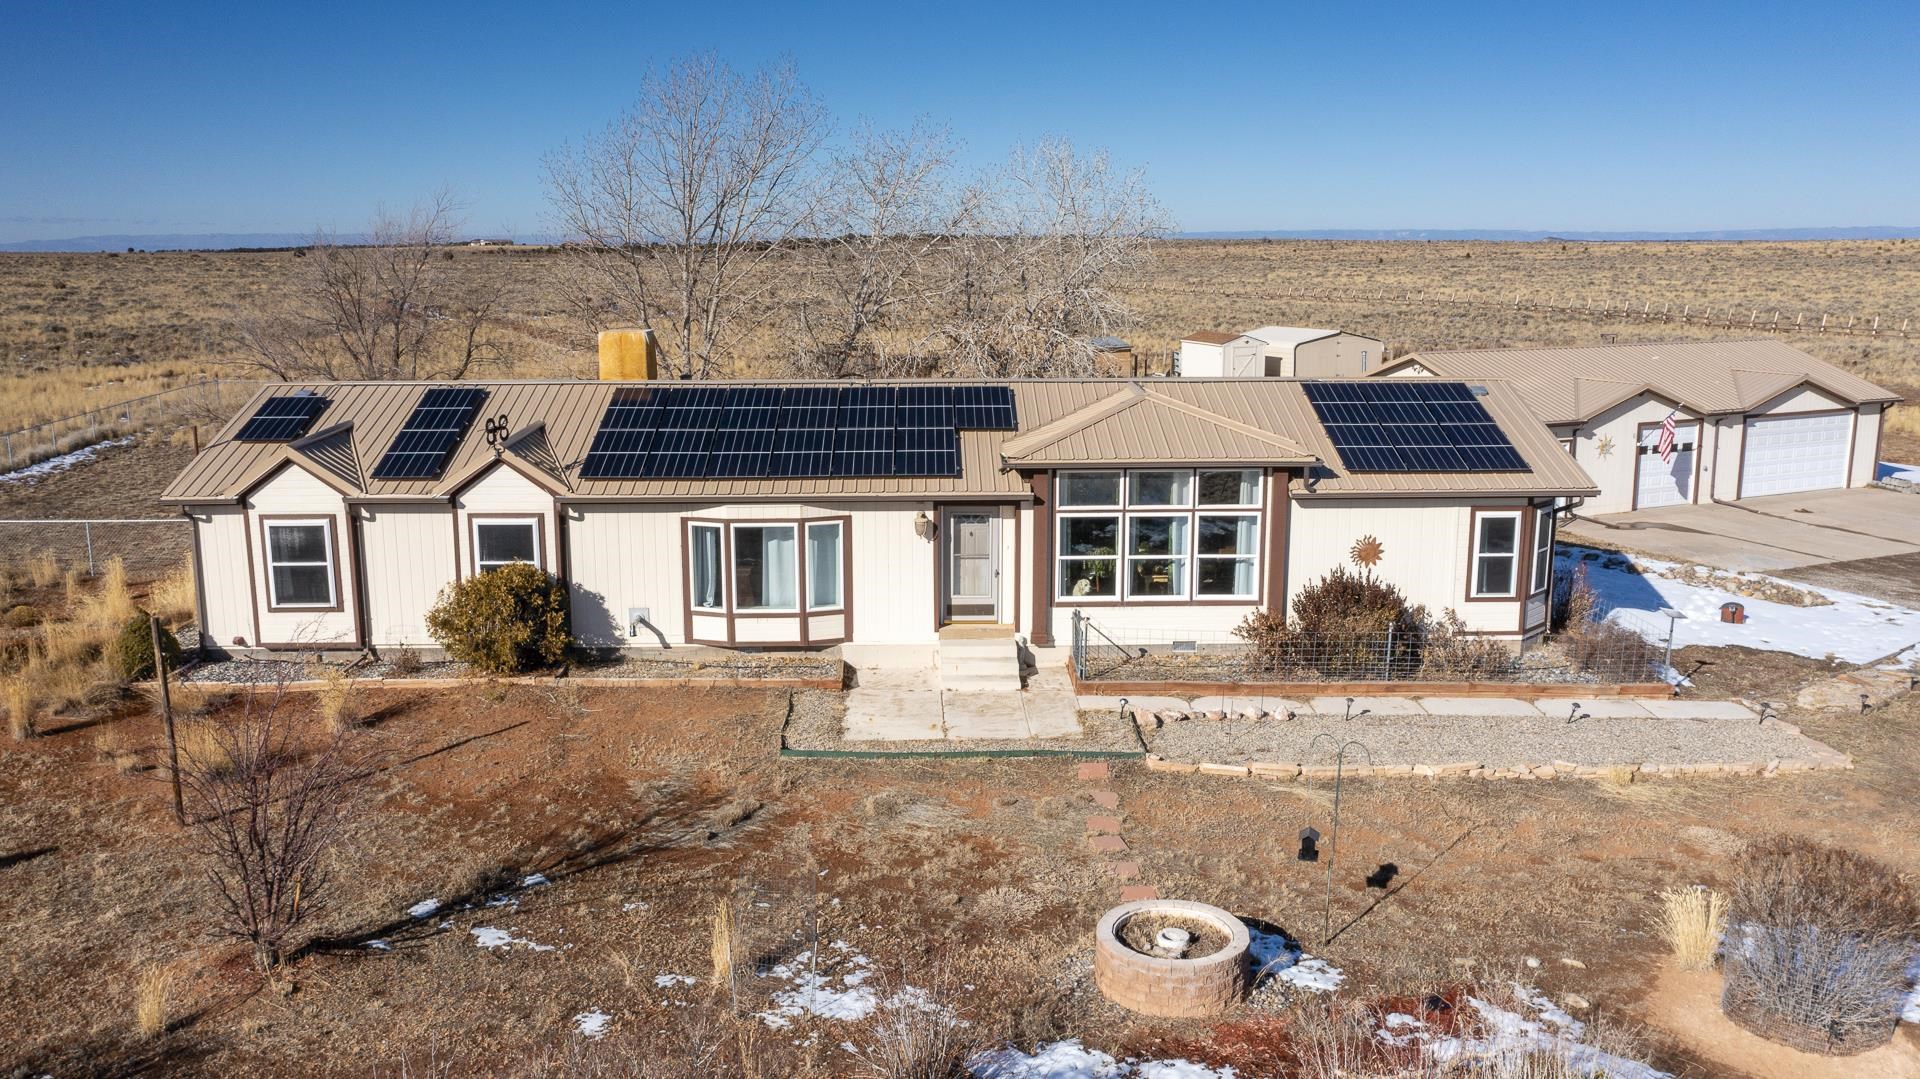 Here is your opportunity to have your own " Homestead" on Glade Park. 38.41 acres, 4 bedroom, 2 bath home ( 1946 sq.ft.) Owned Solar System ( $65,000.00) just installed last year with battery backup. Power goes out, no problem the critical load panel will run the water pump, septic pump, refrigerator + the extra freezer seller had in the kitchen, living room lights, TV and master bedroom outlets. It is also set up to run the battery backup system during the peak hours from 4pm to 9pm ( higher priced) electricity saving you from paying a higher price during those times. Home has central air ( there is also a swamp cooler they never used) 2 propane tanks ( owned). Great floorplan with large windows, skylights, living and family room and Studio/Exercise room 600+ sq. ft. insulated, heated and cooled in the garage. Ultimate game room! Covered patio for outdoor entertaining with access from the kitchen, makes outdoor entertaining easy. Multiple outbuildings, chicken coop, wood shed you will have plenty of room for all your stuff. Pistol and rifle shooting range as well. Home Warranty included.